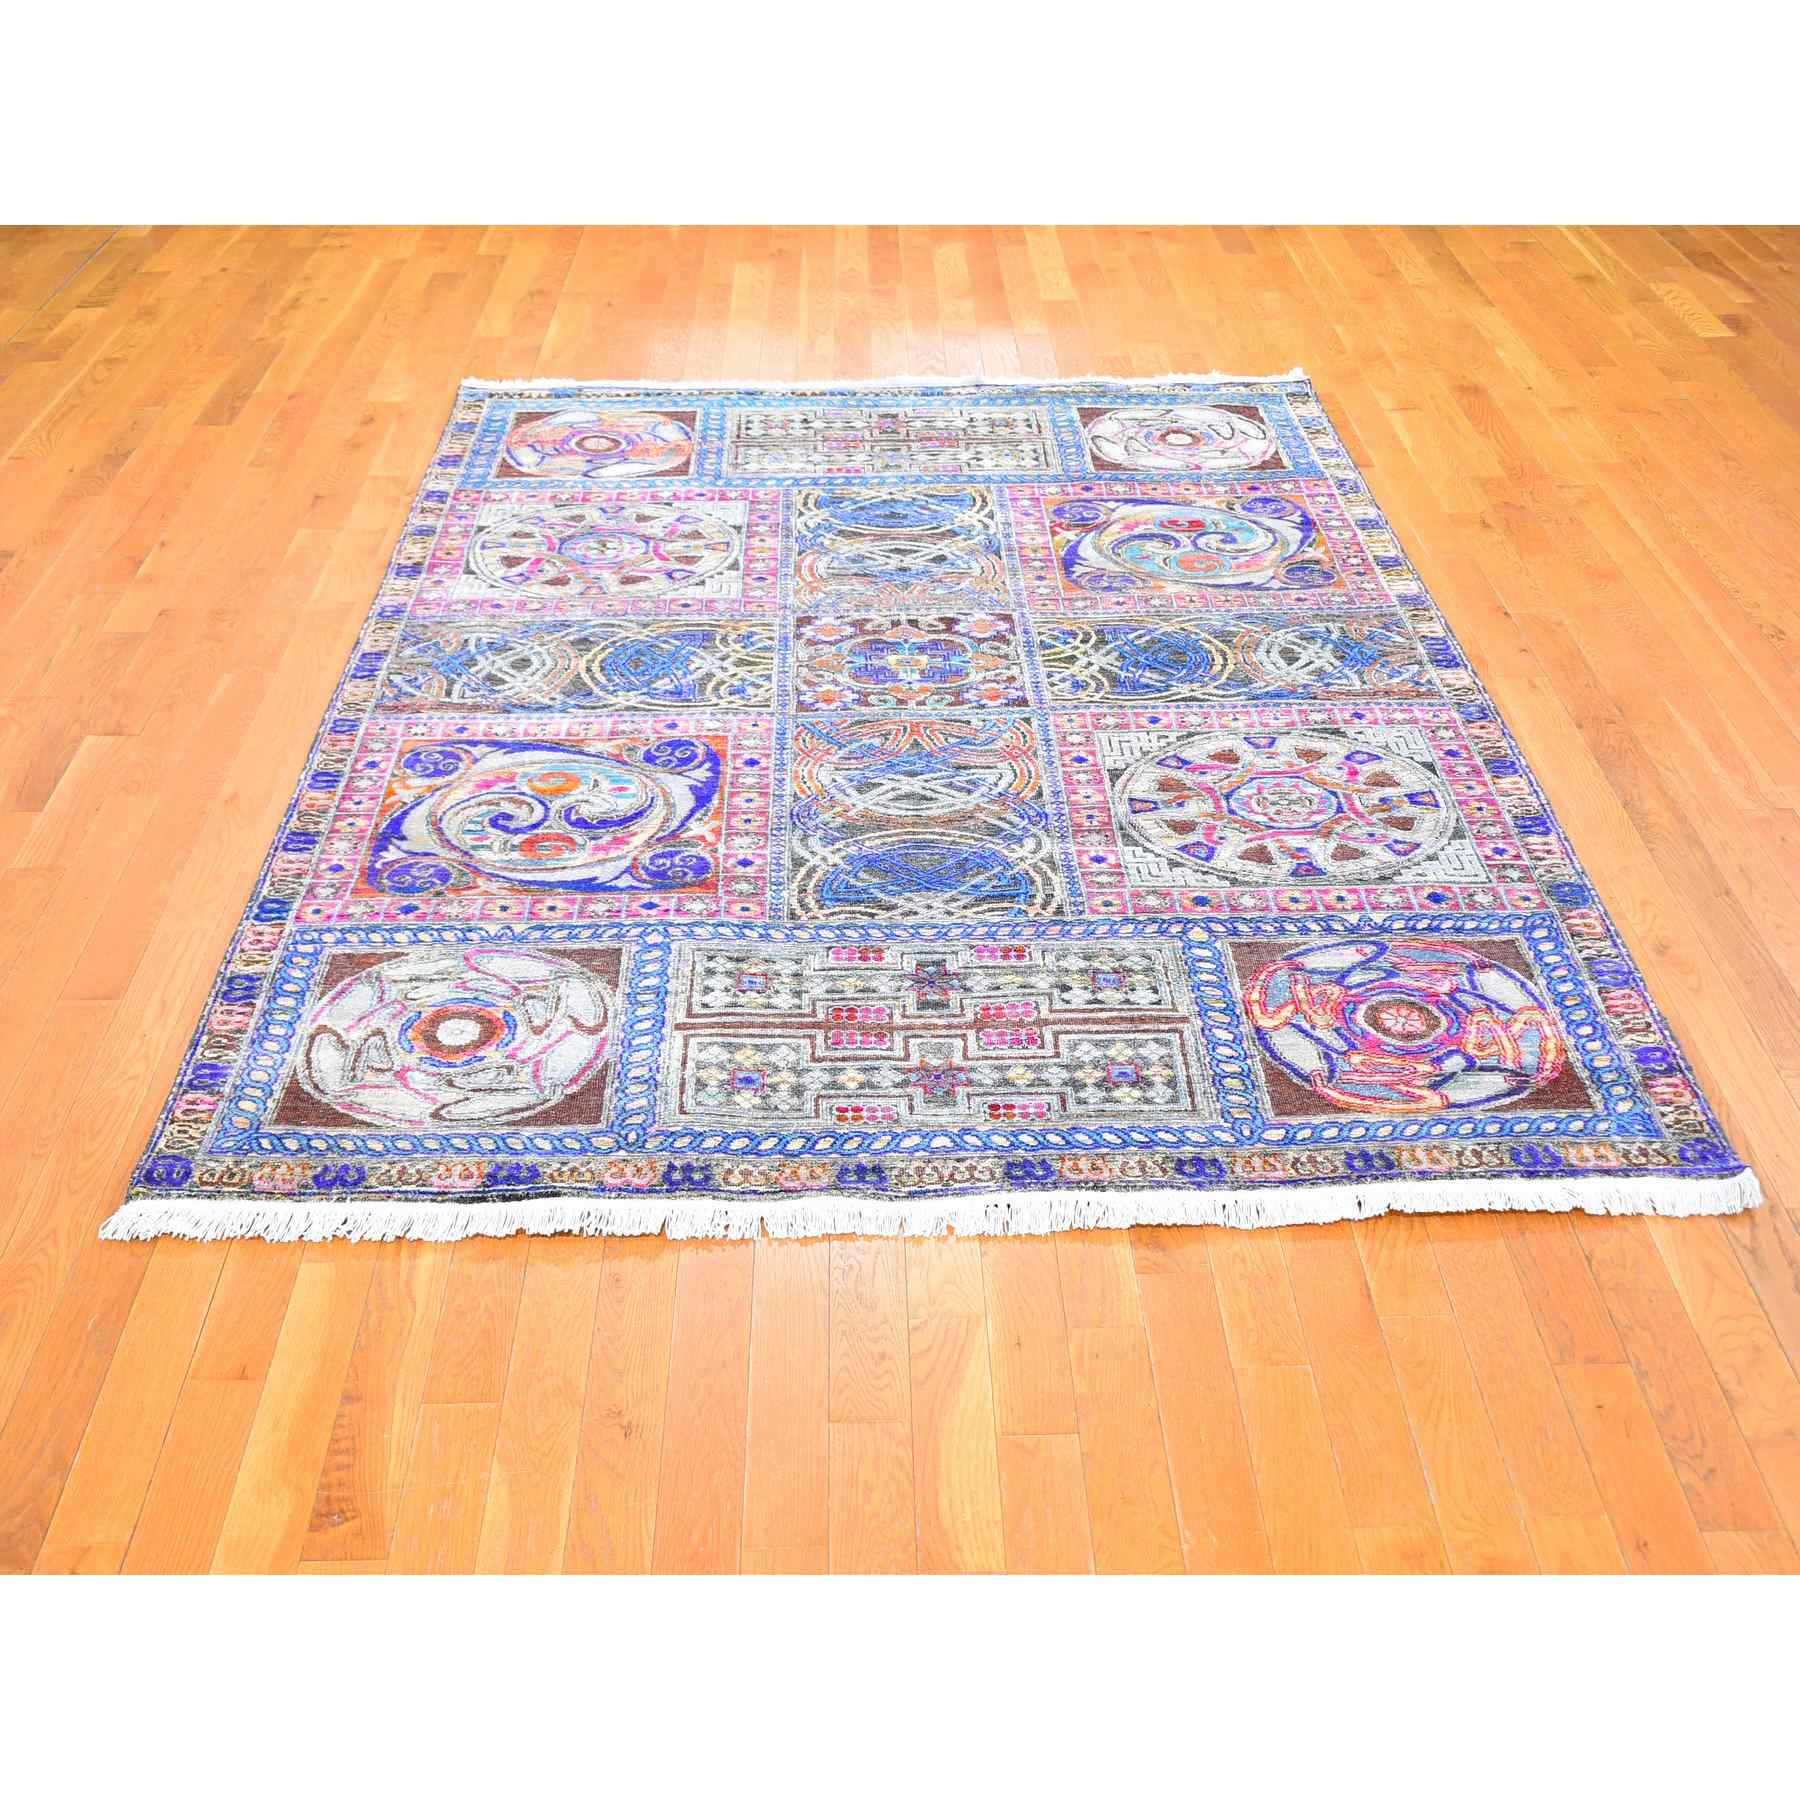 Arts-And-Crafts-Hand-Knotted-Rug-297400